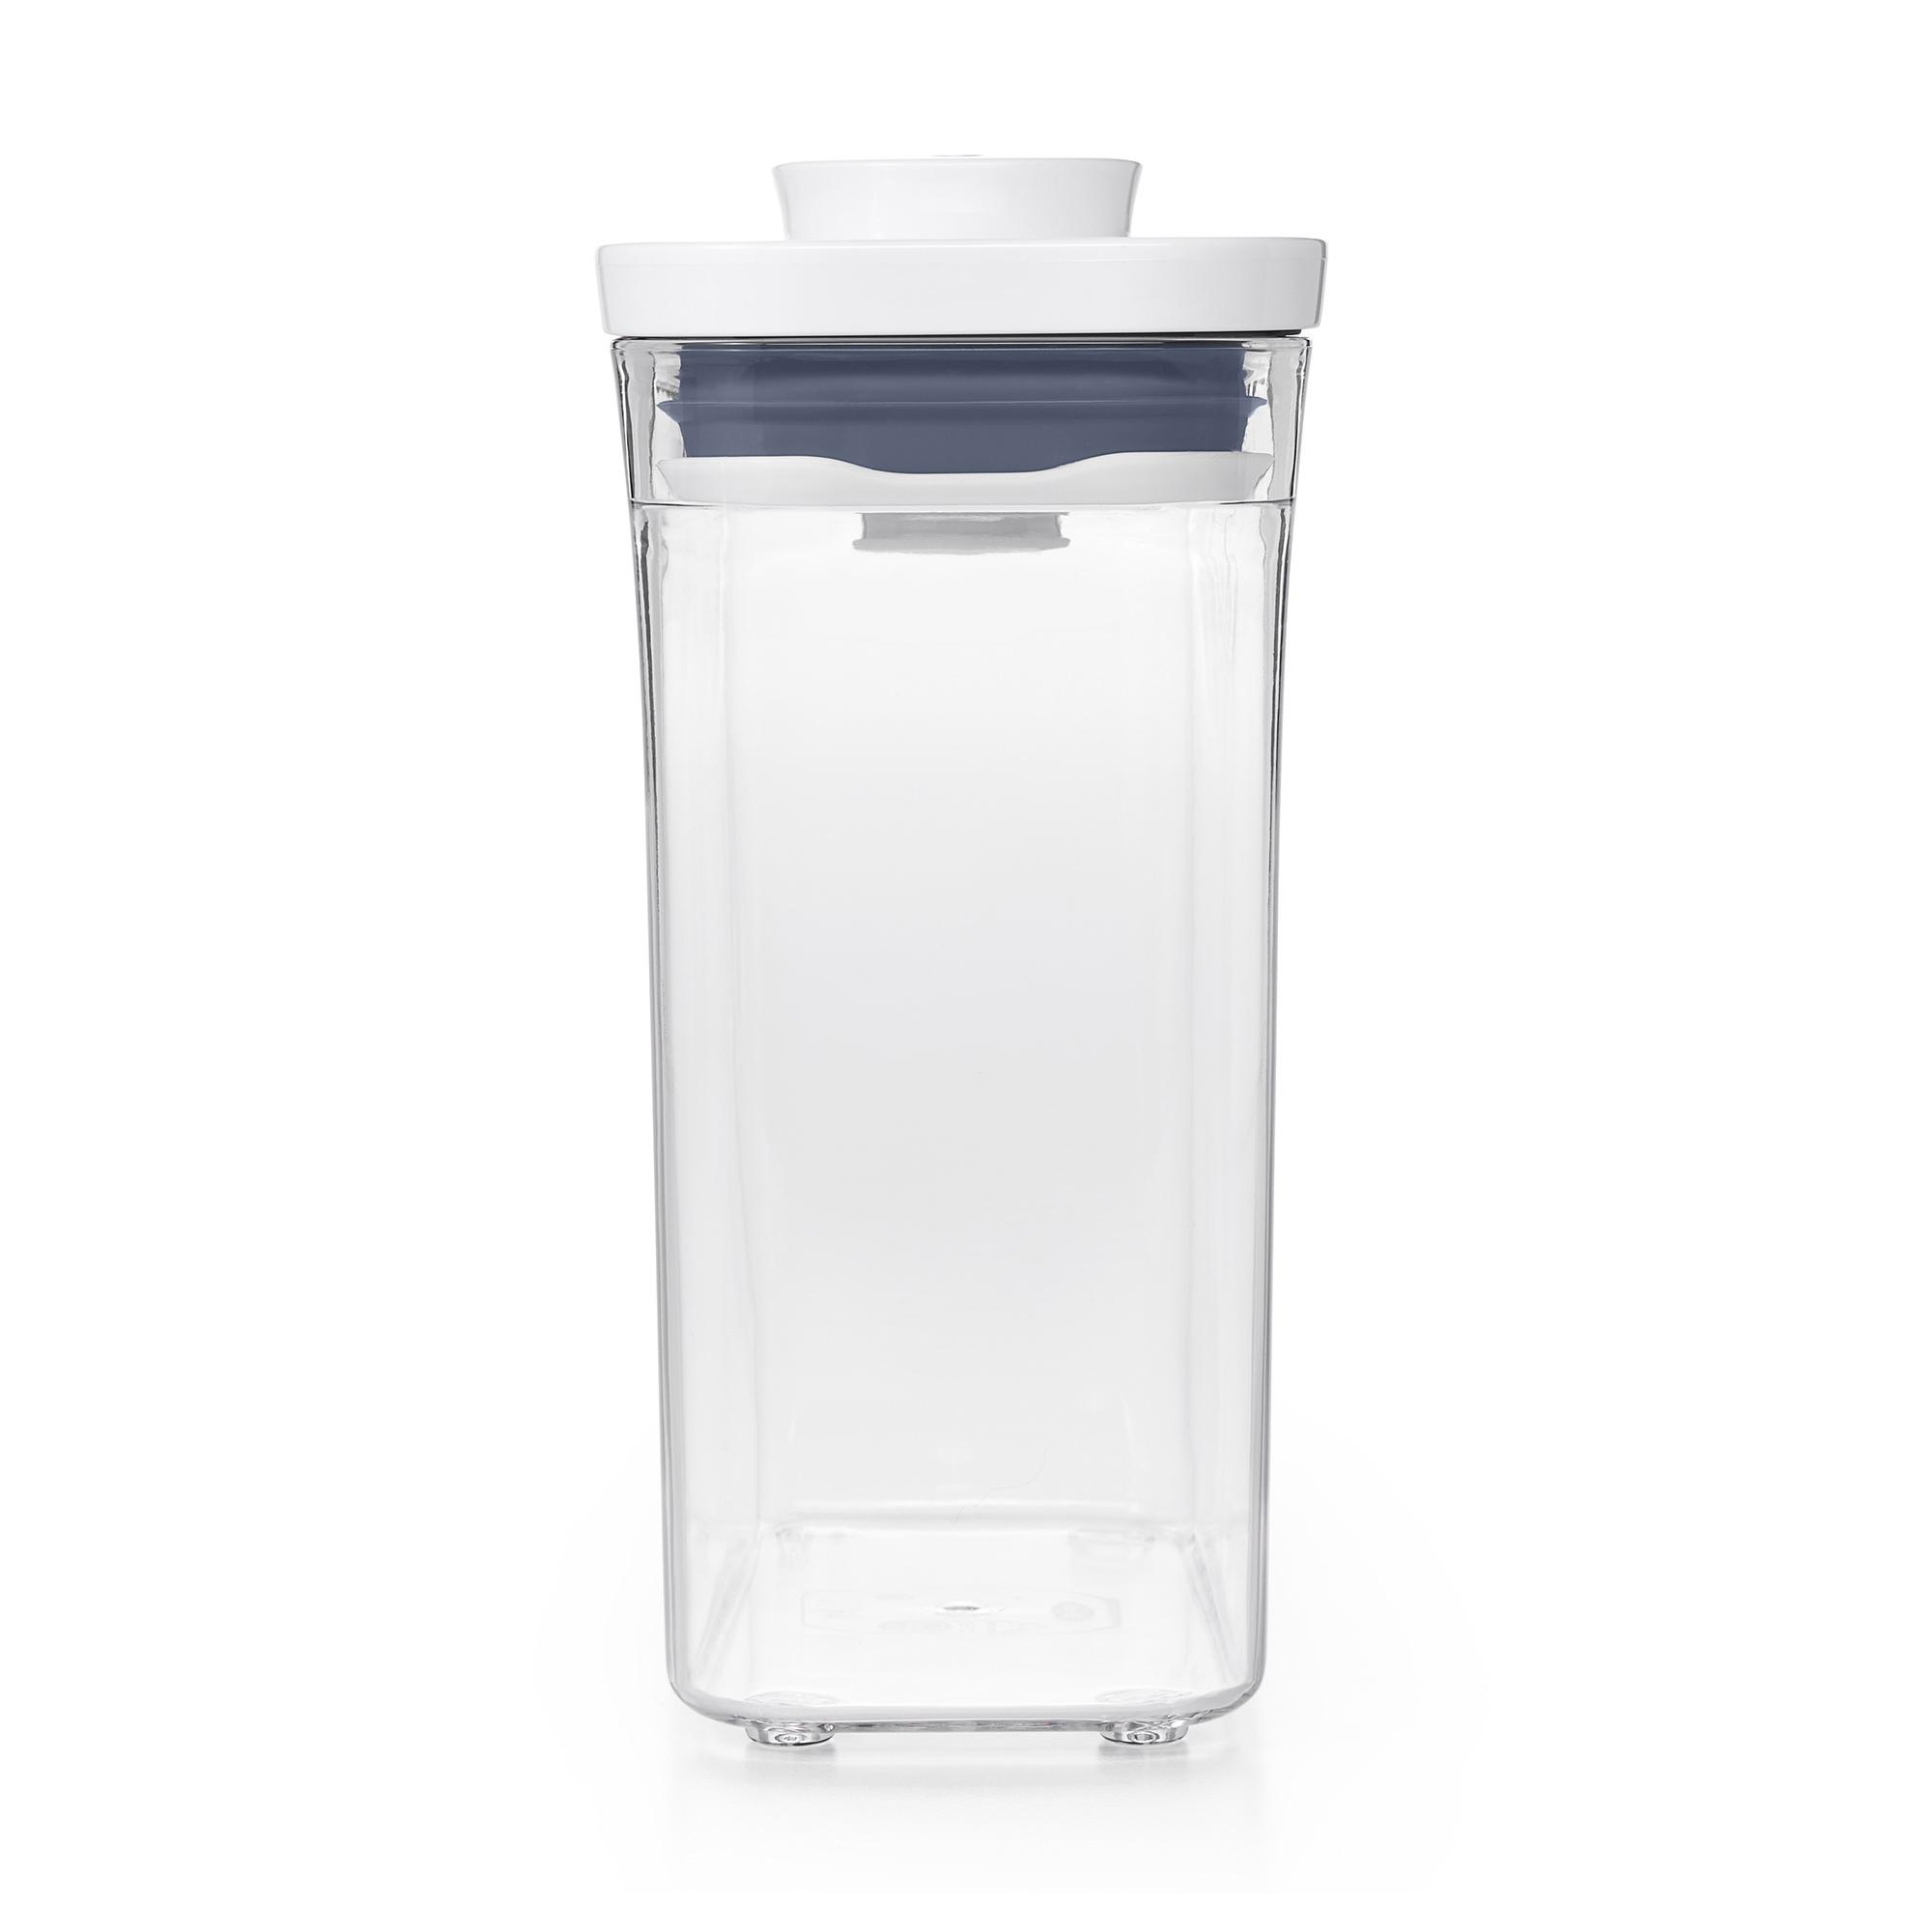 OXO Good Grips Rectangular Pop 2.0 Container 1.1L Image 3